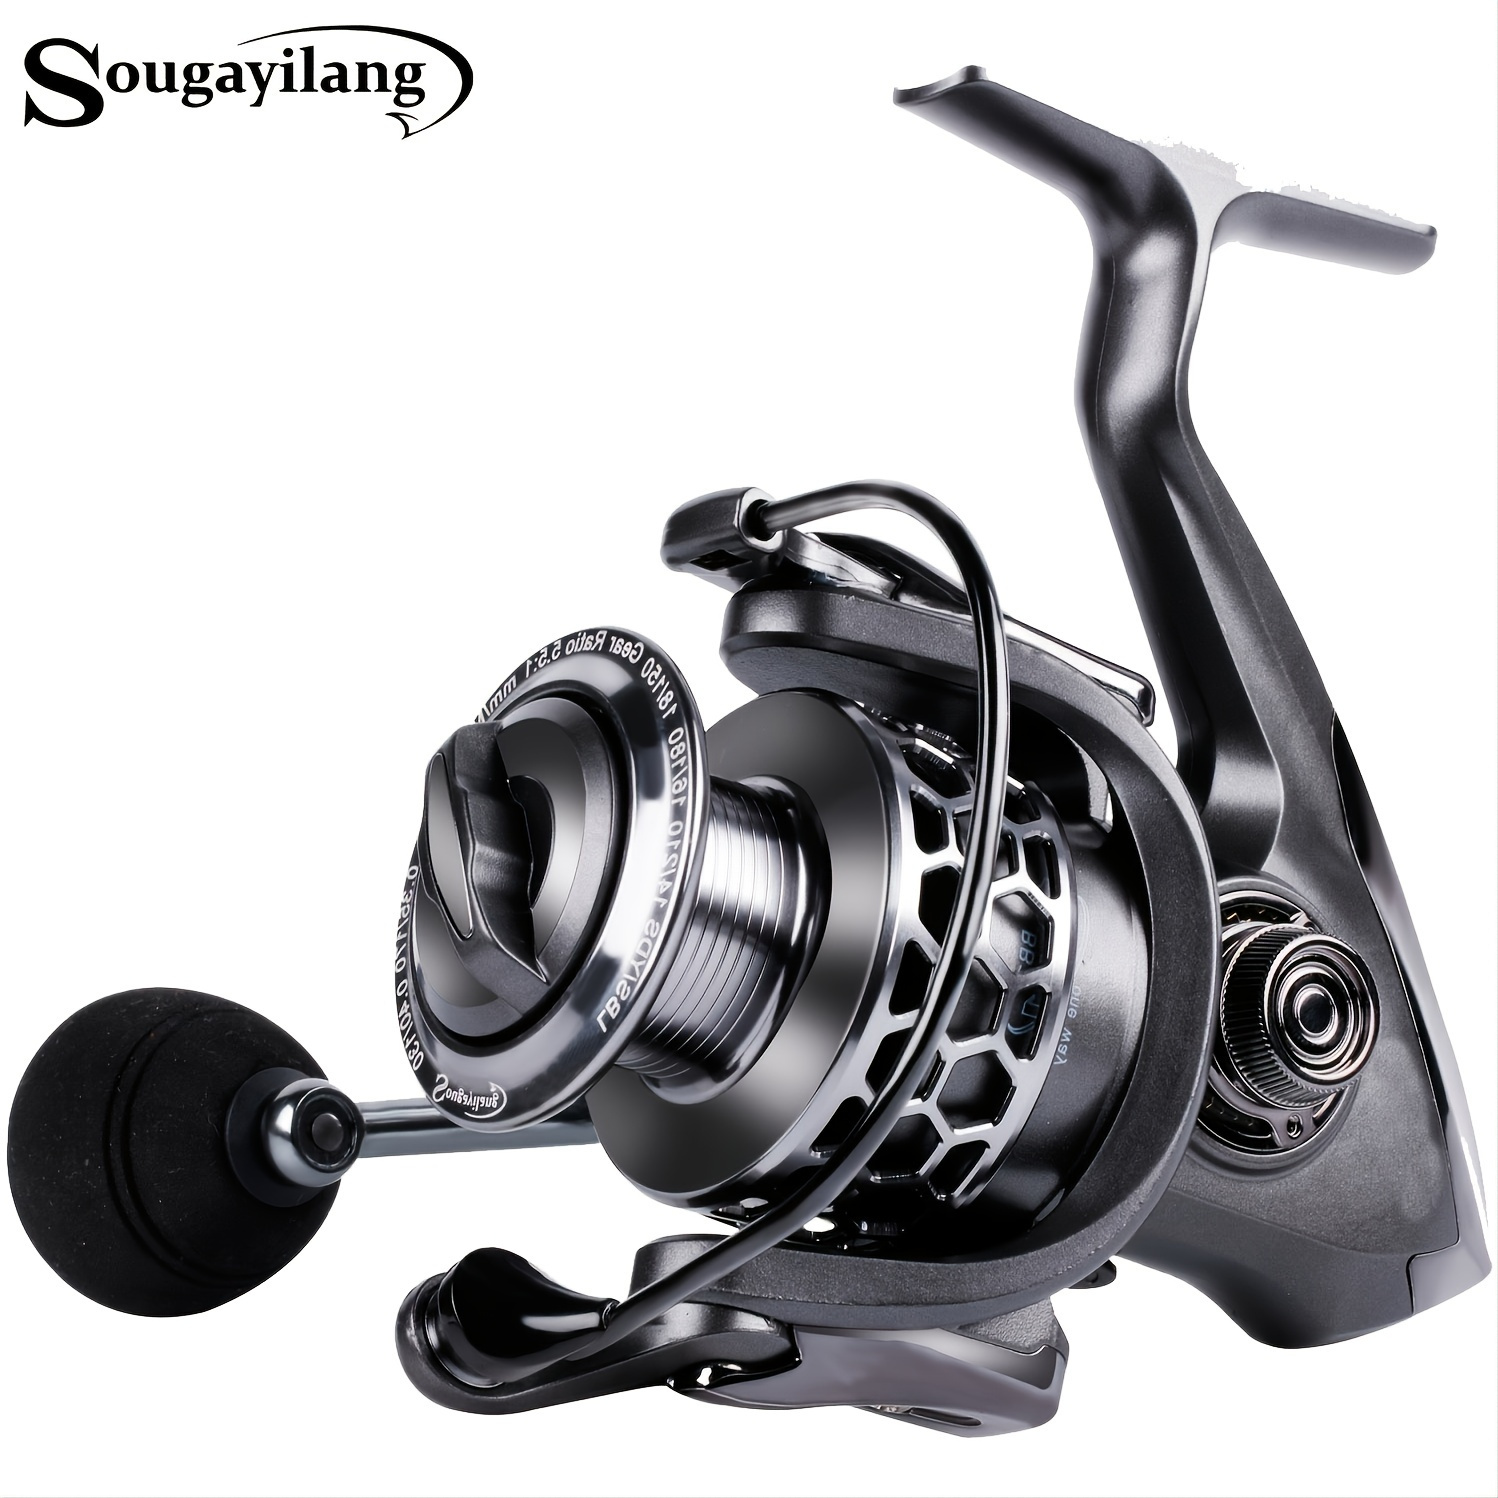 Fishing reel Spinning Fishing Reel 12+1 Bearings Left Right Interchangeable  Handle For Fishing With Double Drag Brake System Fixed reel of fishing